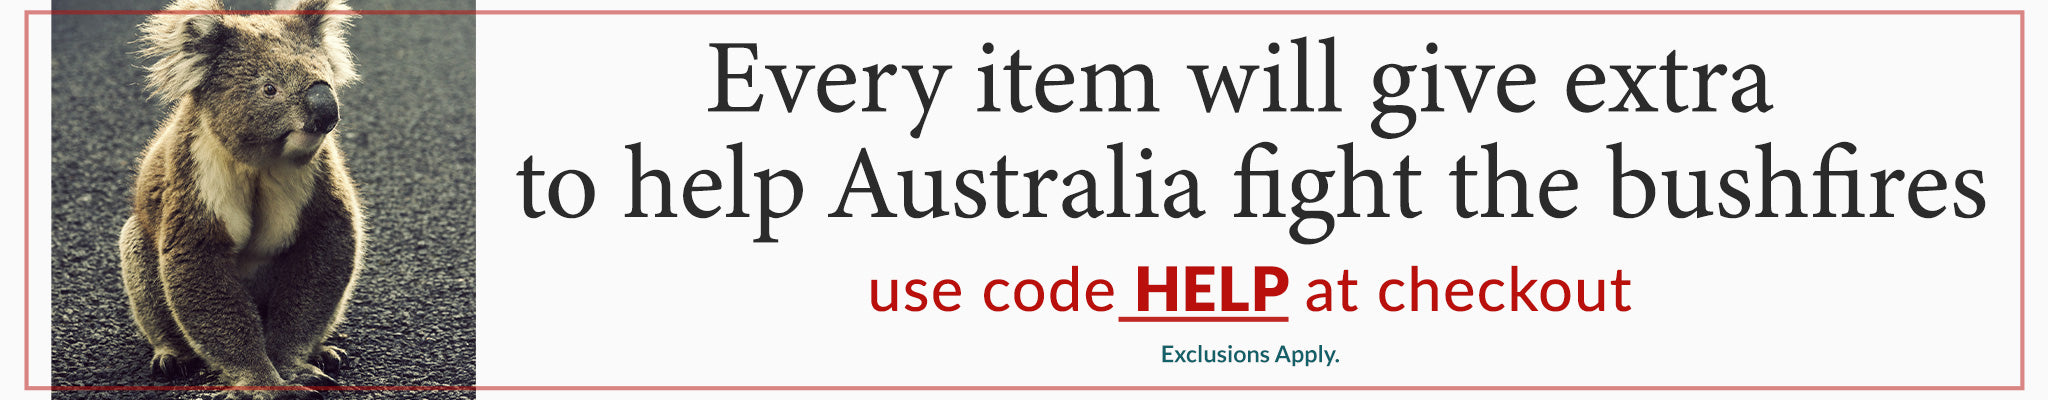 Every item will give extra to help Australia fight the bushfires | Use code HELP at checkout | Exclusions Apply.